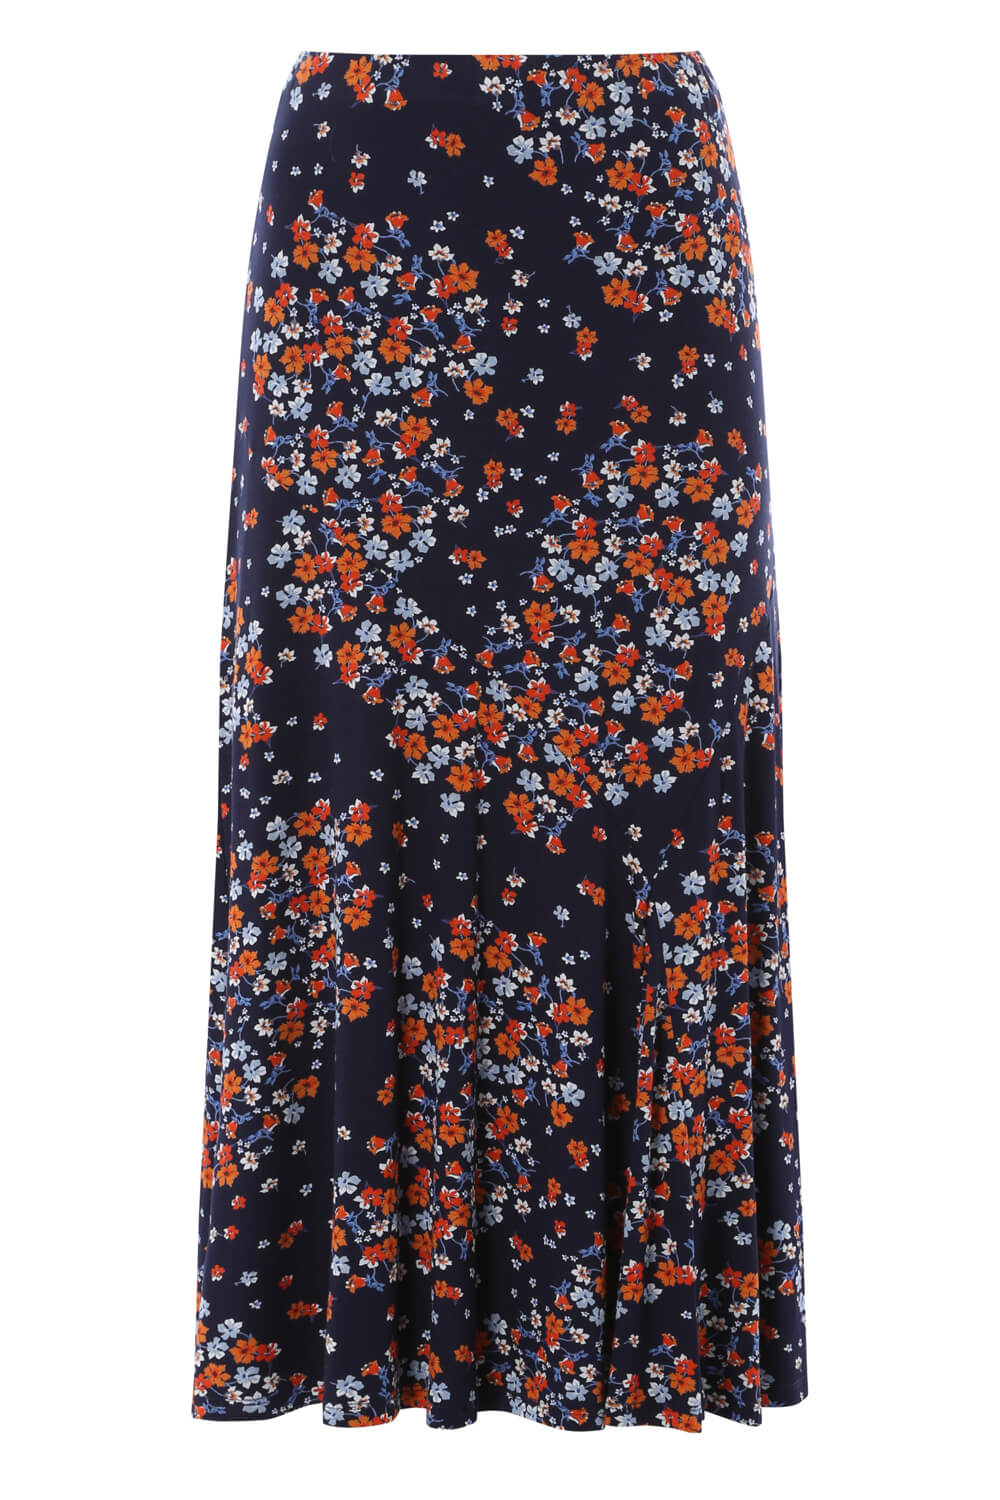 Navy  Panel Ditsy Floral Skirt, Image 4 of 4